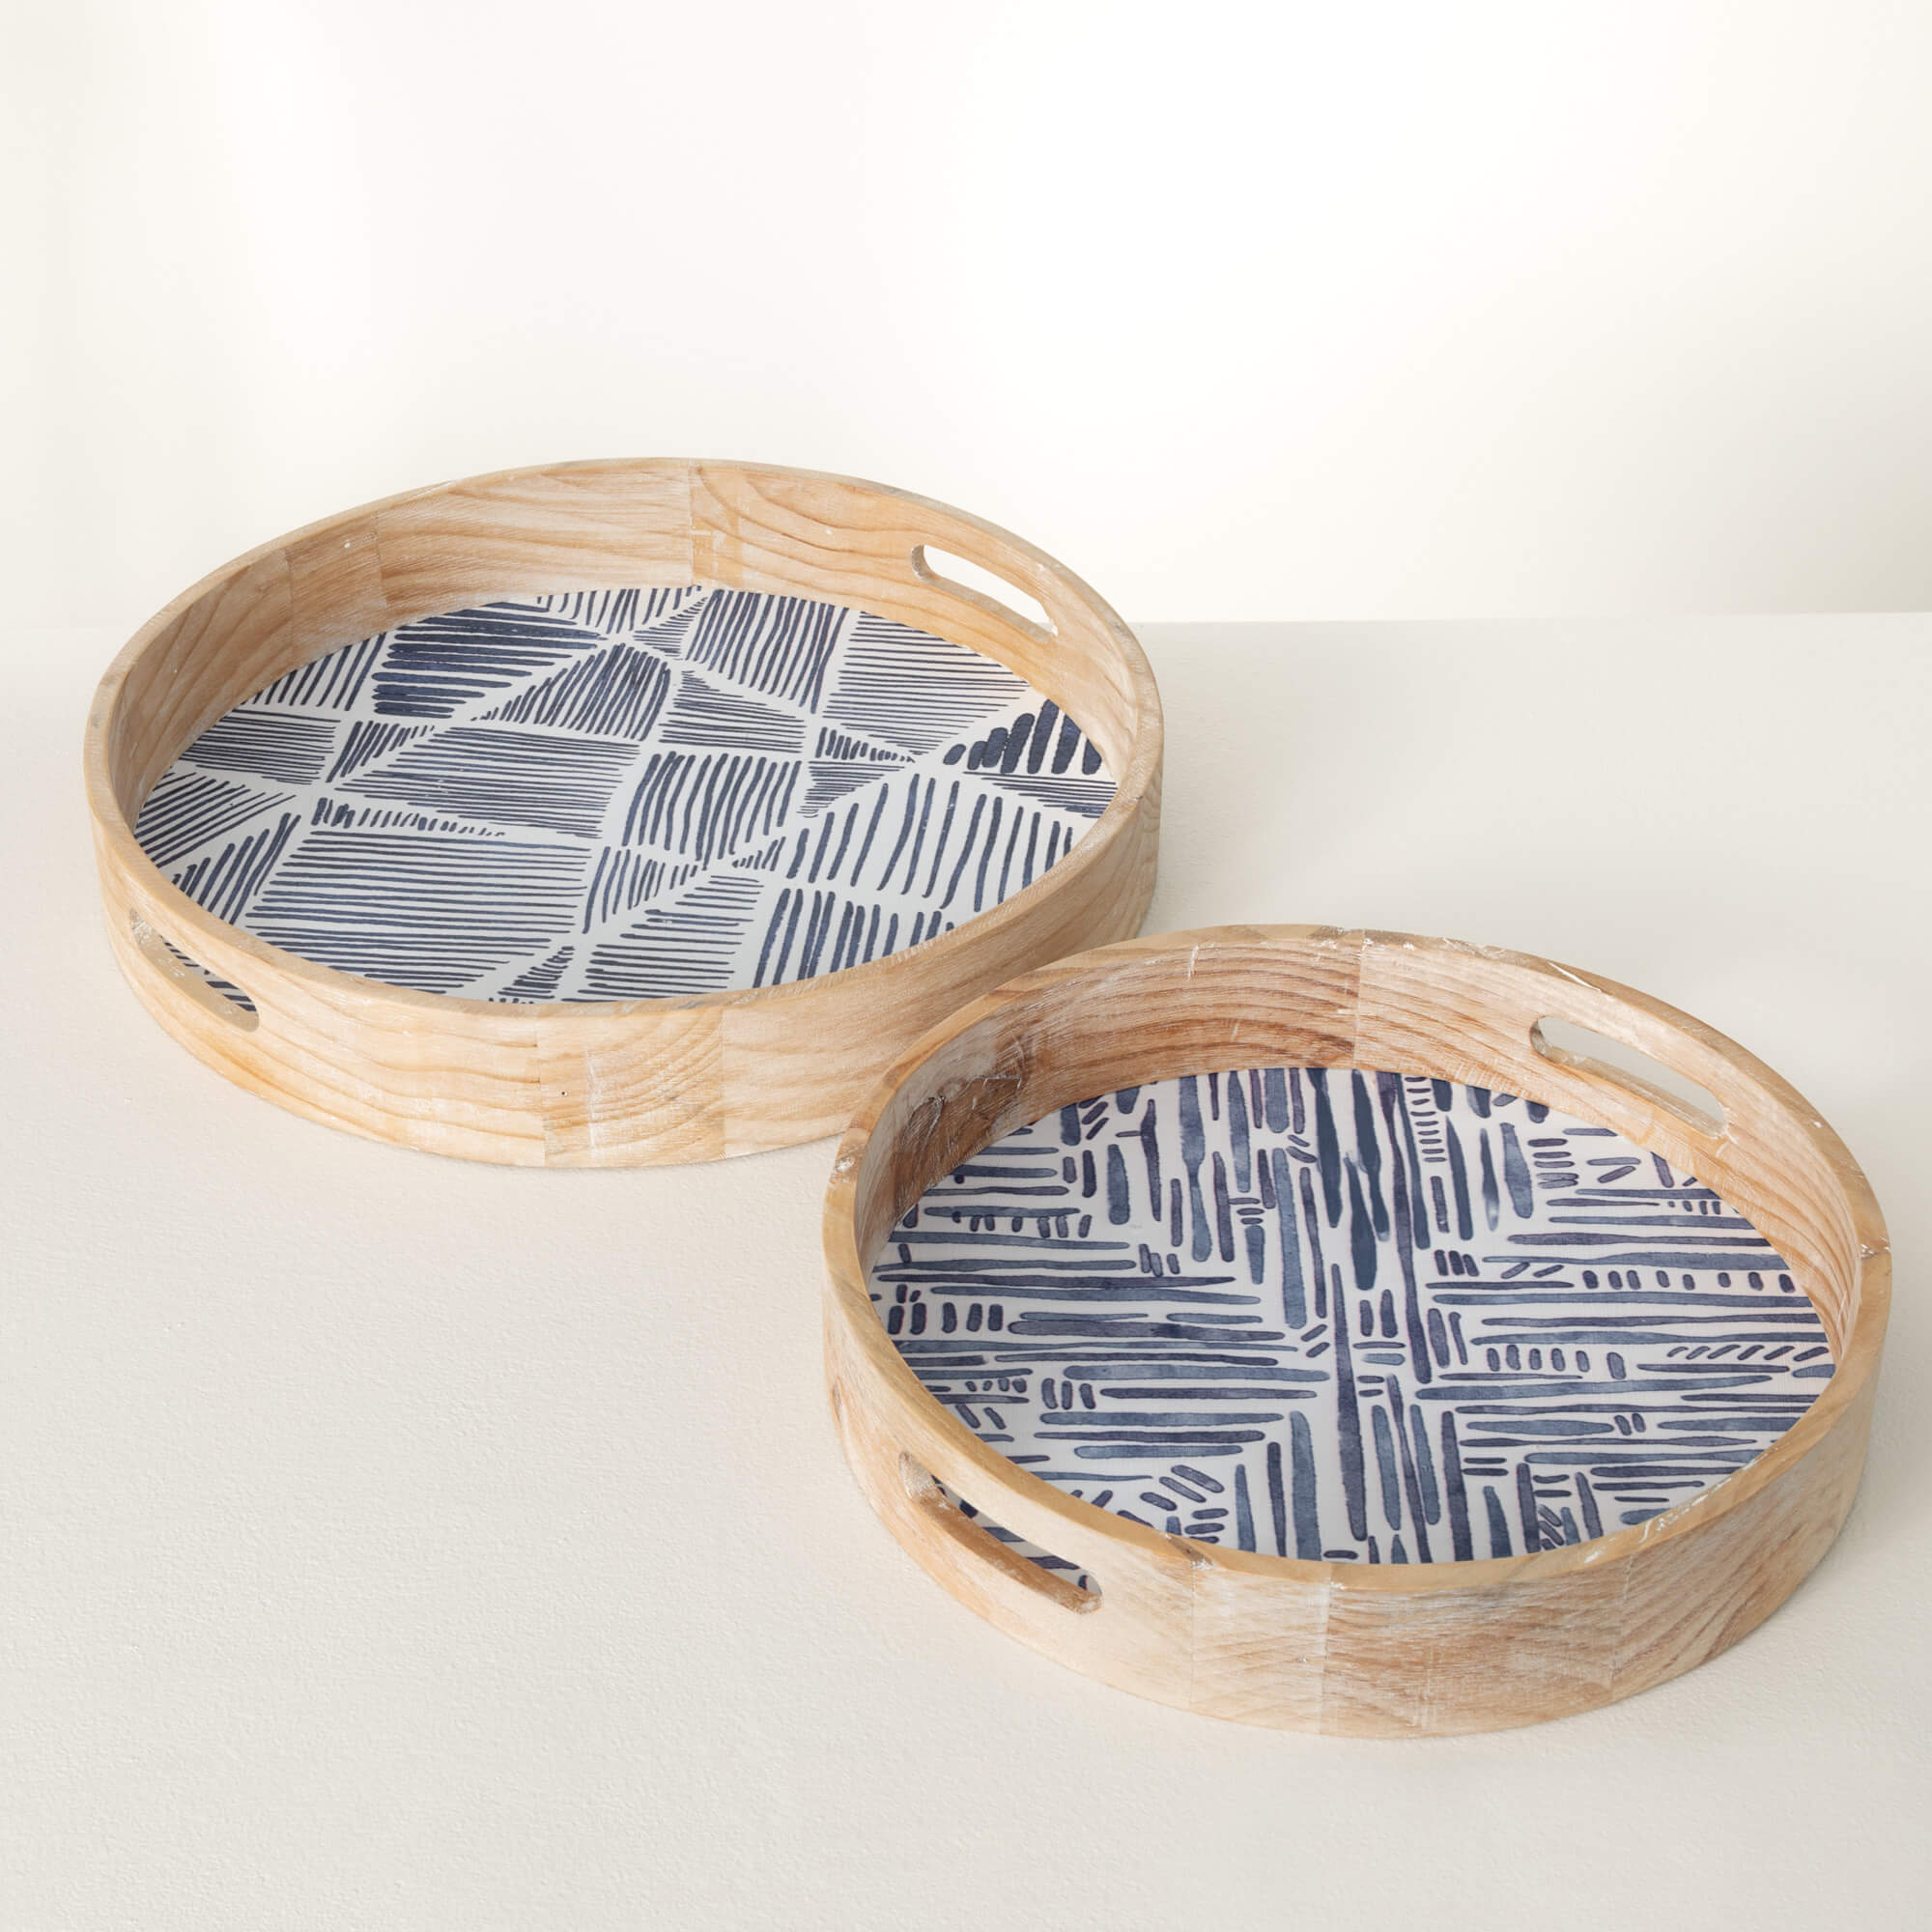 Decorative Patterned Tray Set Elevate Home Decor - Trays